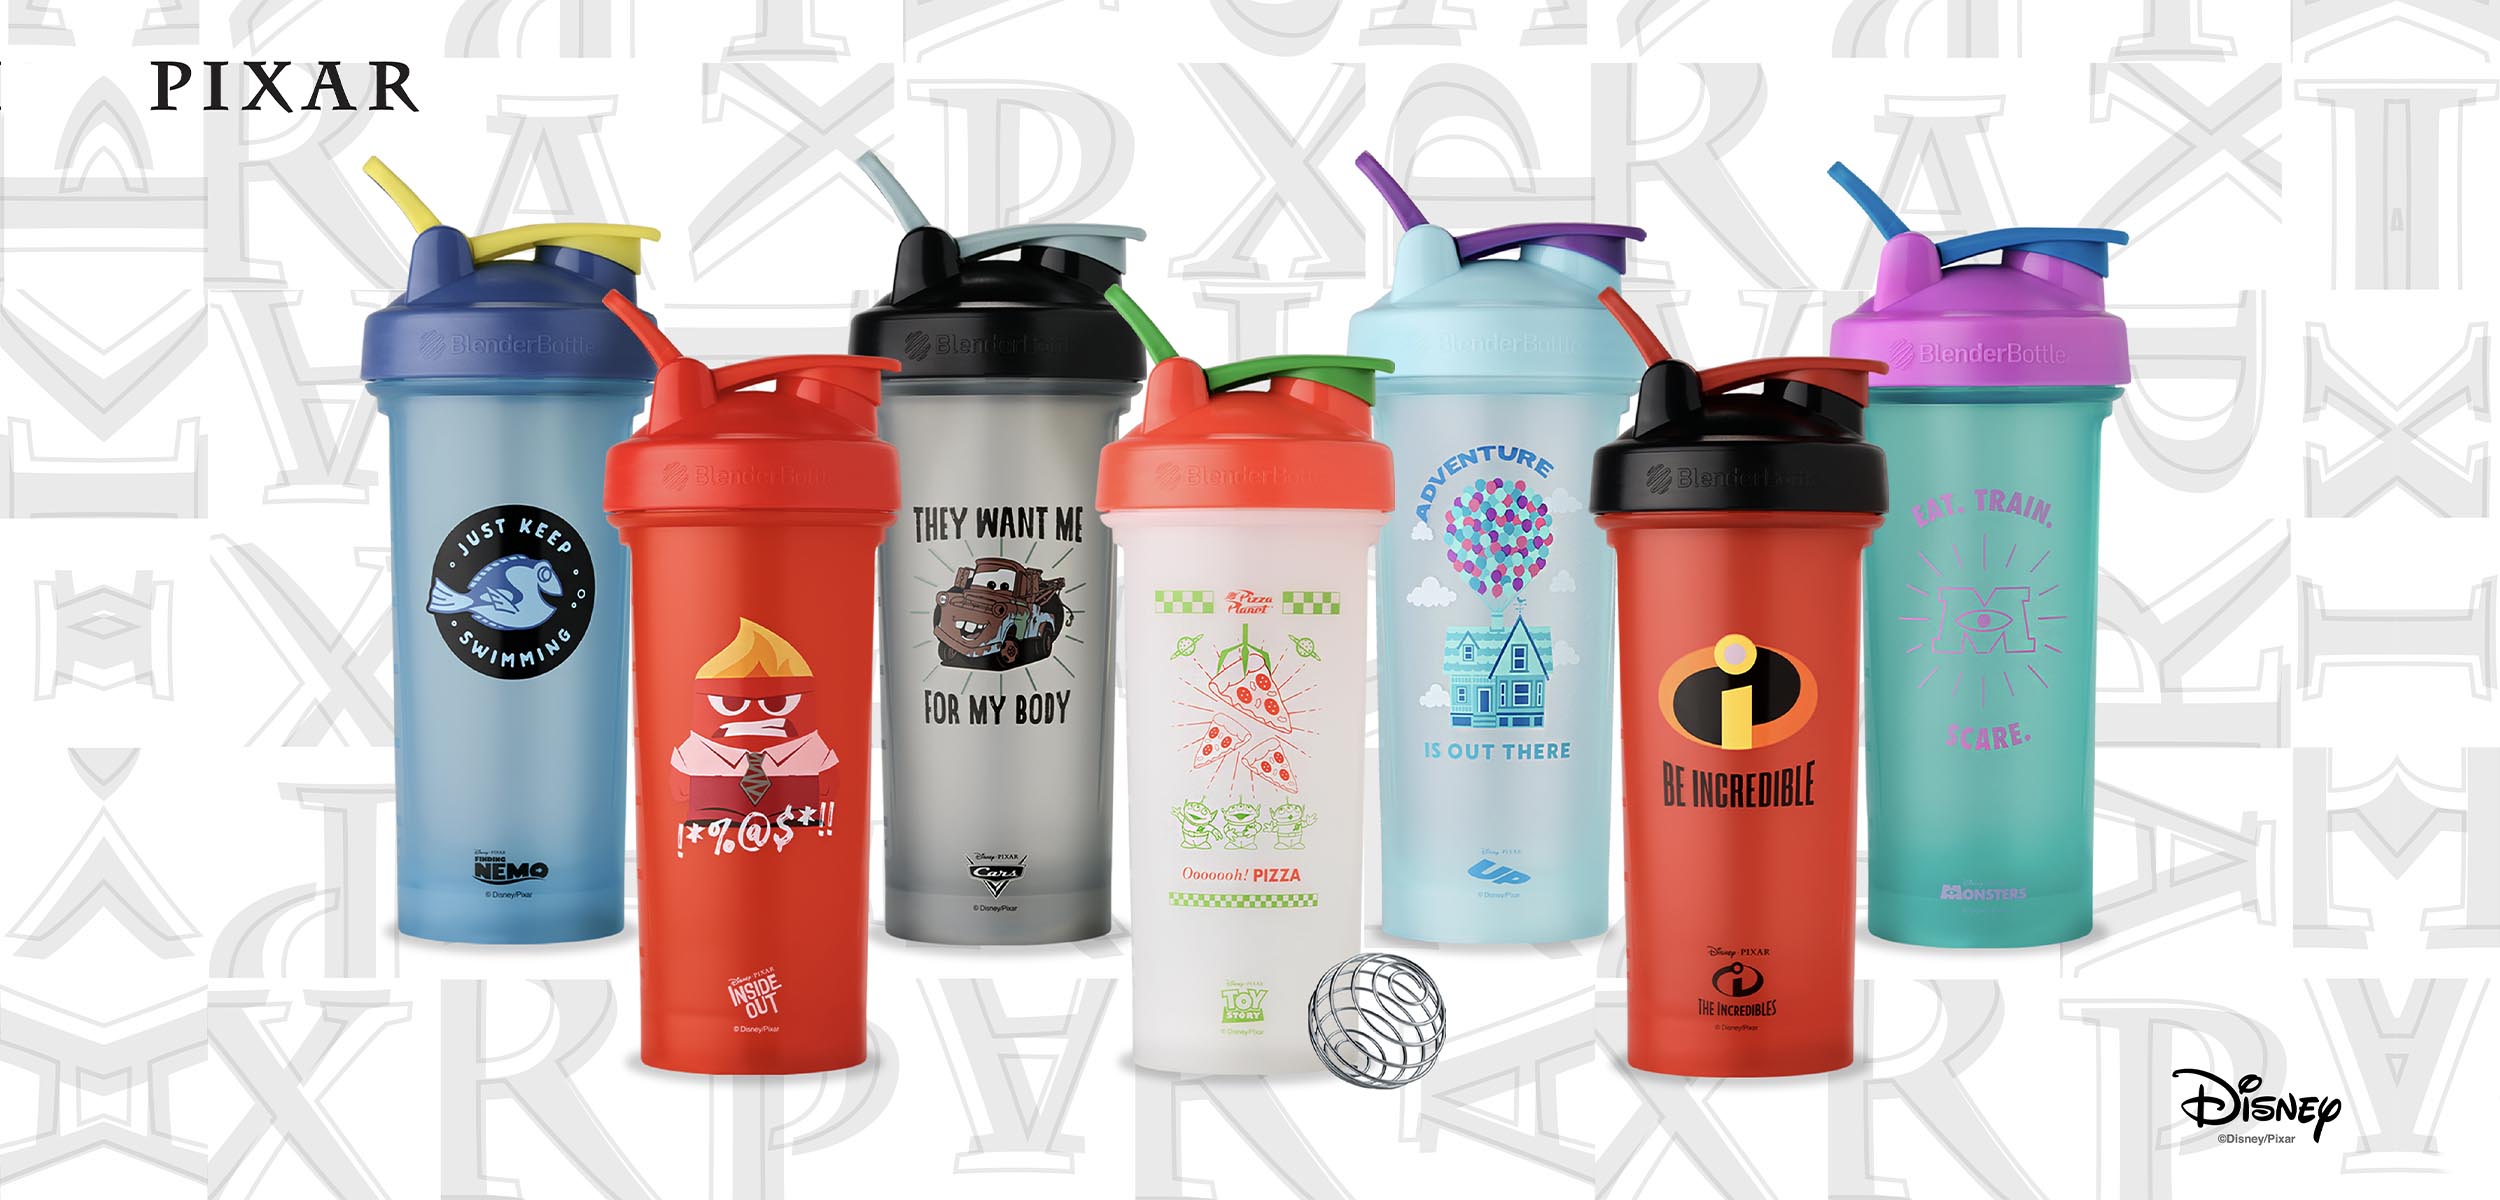 Armourup Asia - What's shakin' in your cute @blenderbottle